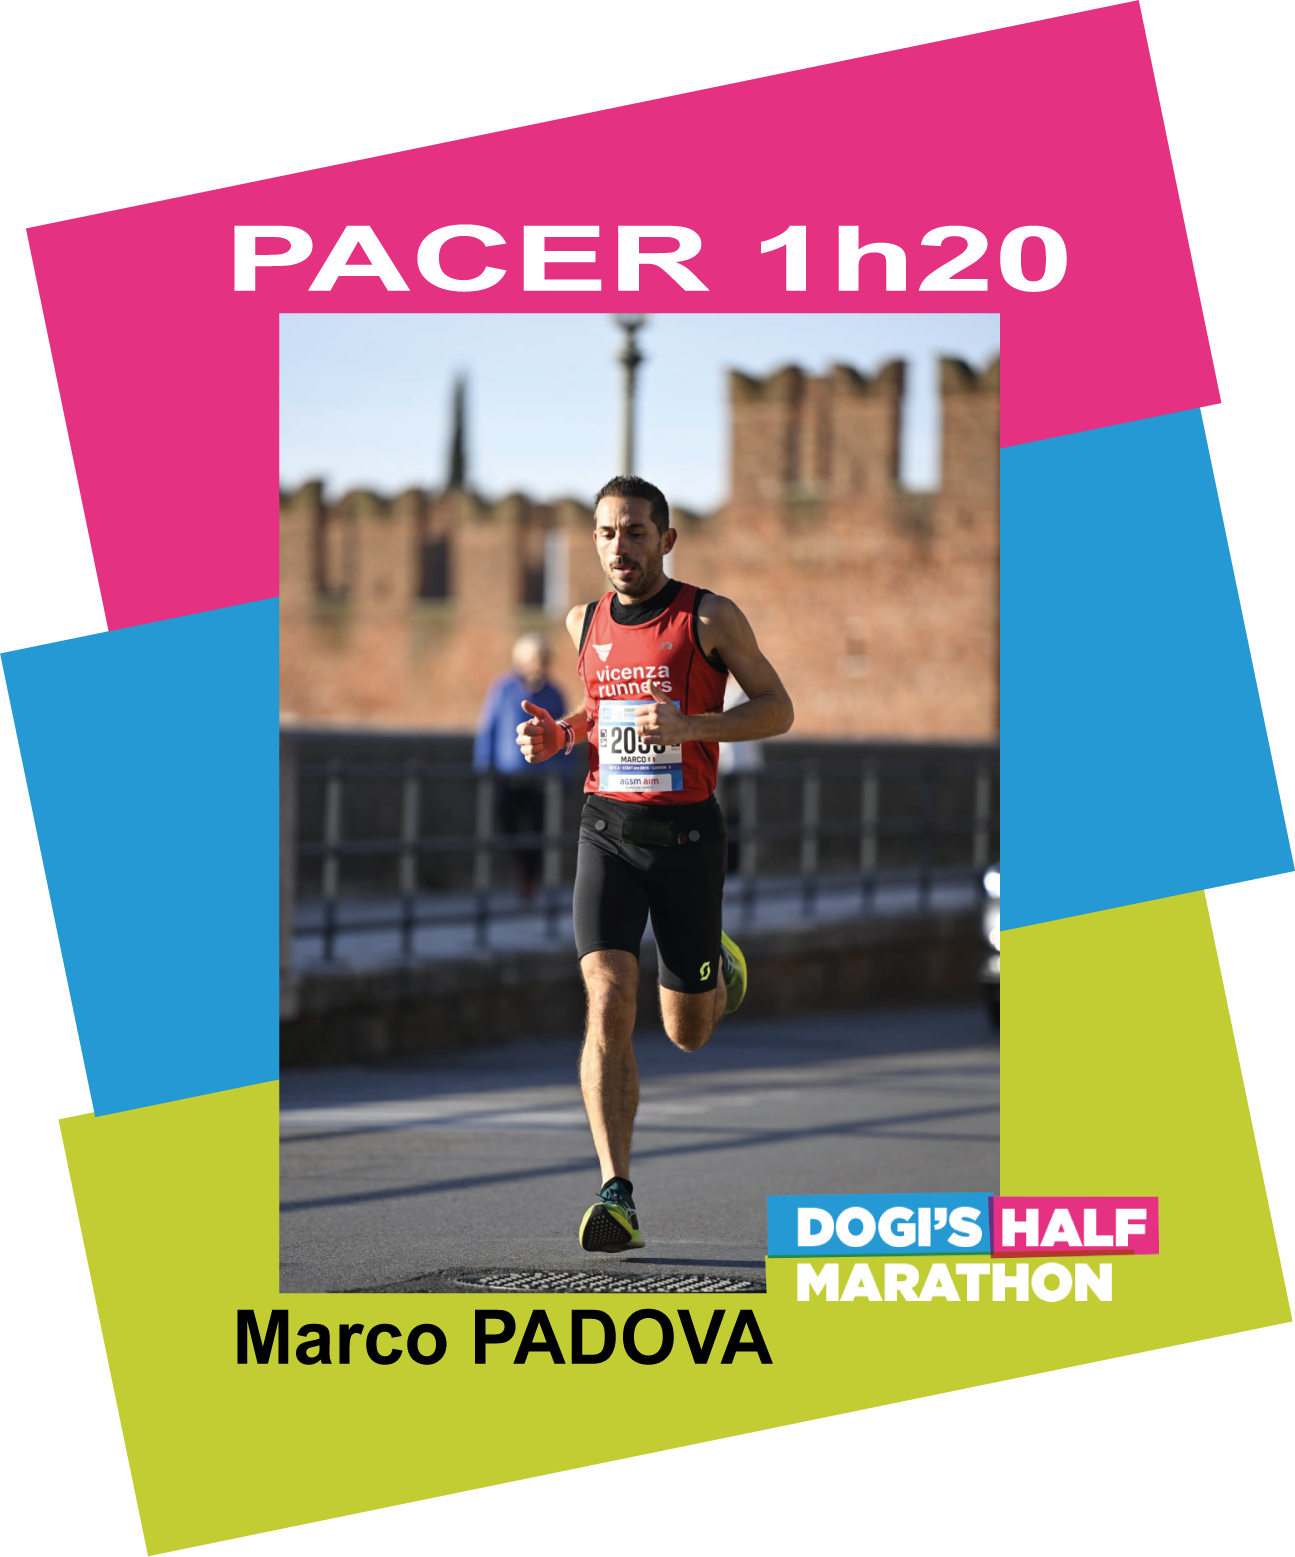 Pacer 1h20